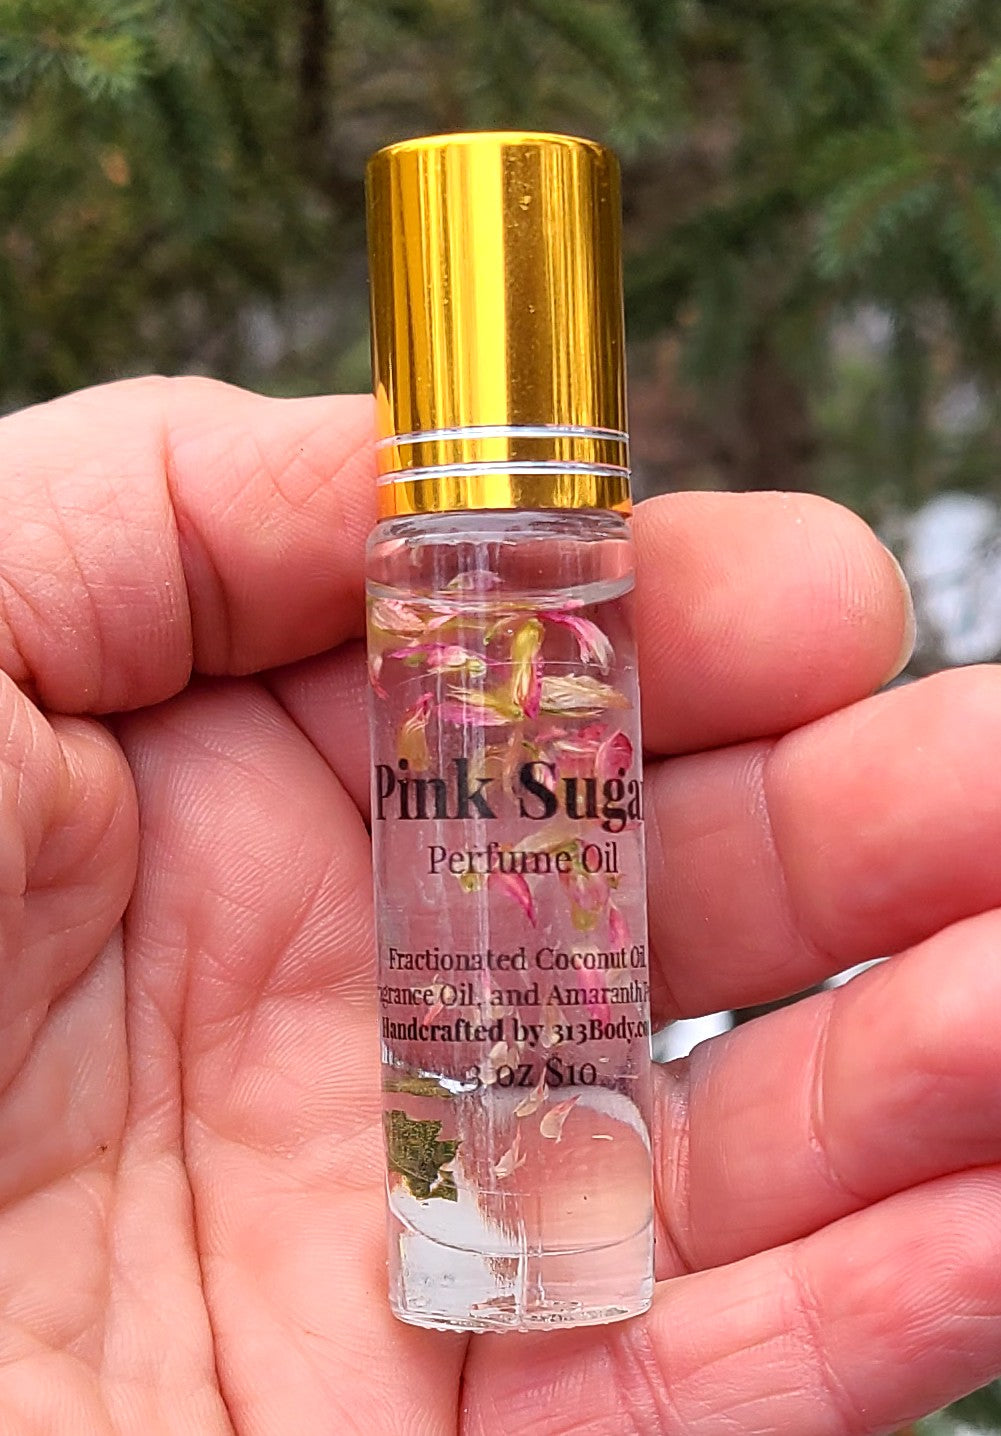 Vanilla Cotton Candy "Pink Sugar dupe" Perfume Oil